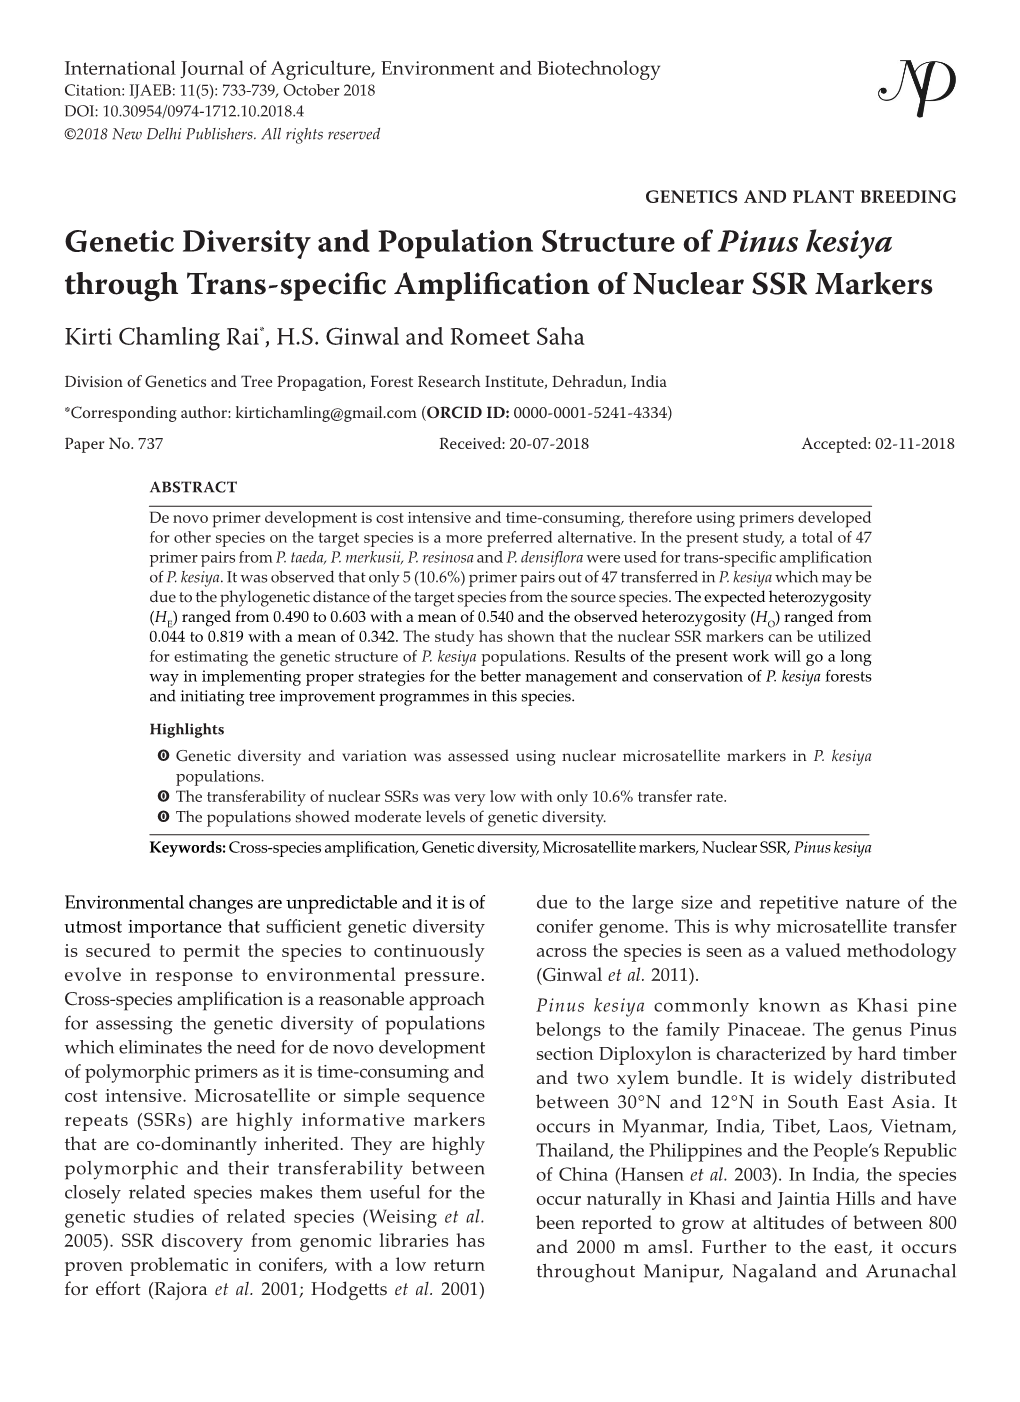 Genetic Diversity and Population Structure of Pinus Kesiya Through Trans-Specific Amplification of Nuclear SSR Markers Kirti Chamling Rai*, H.S